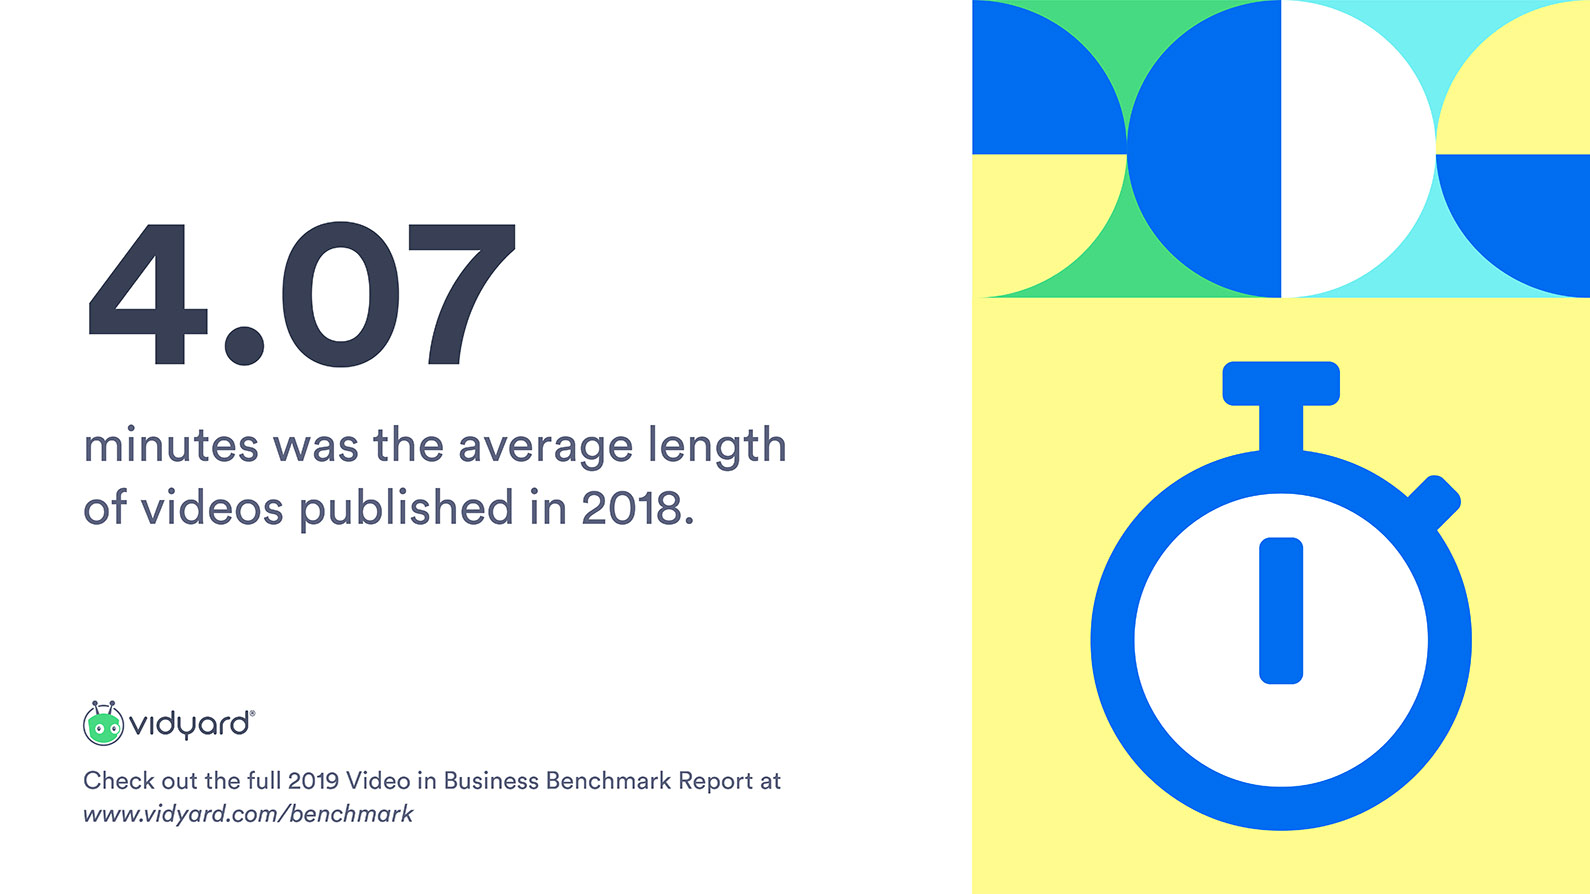 infographic displaying average video length in 2018—copy reads: "4.07 minutes was the average length of videos published in 2018."